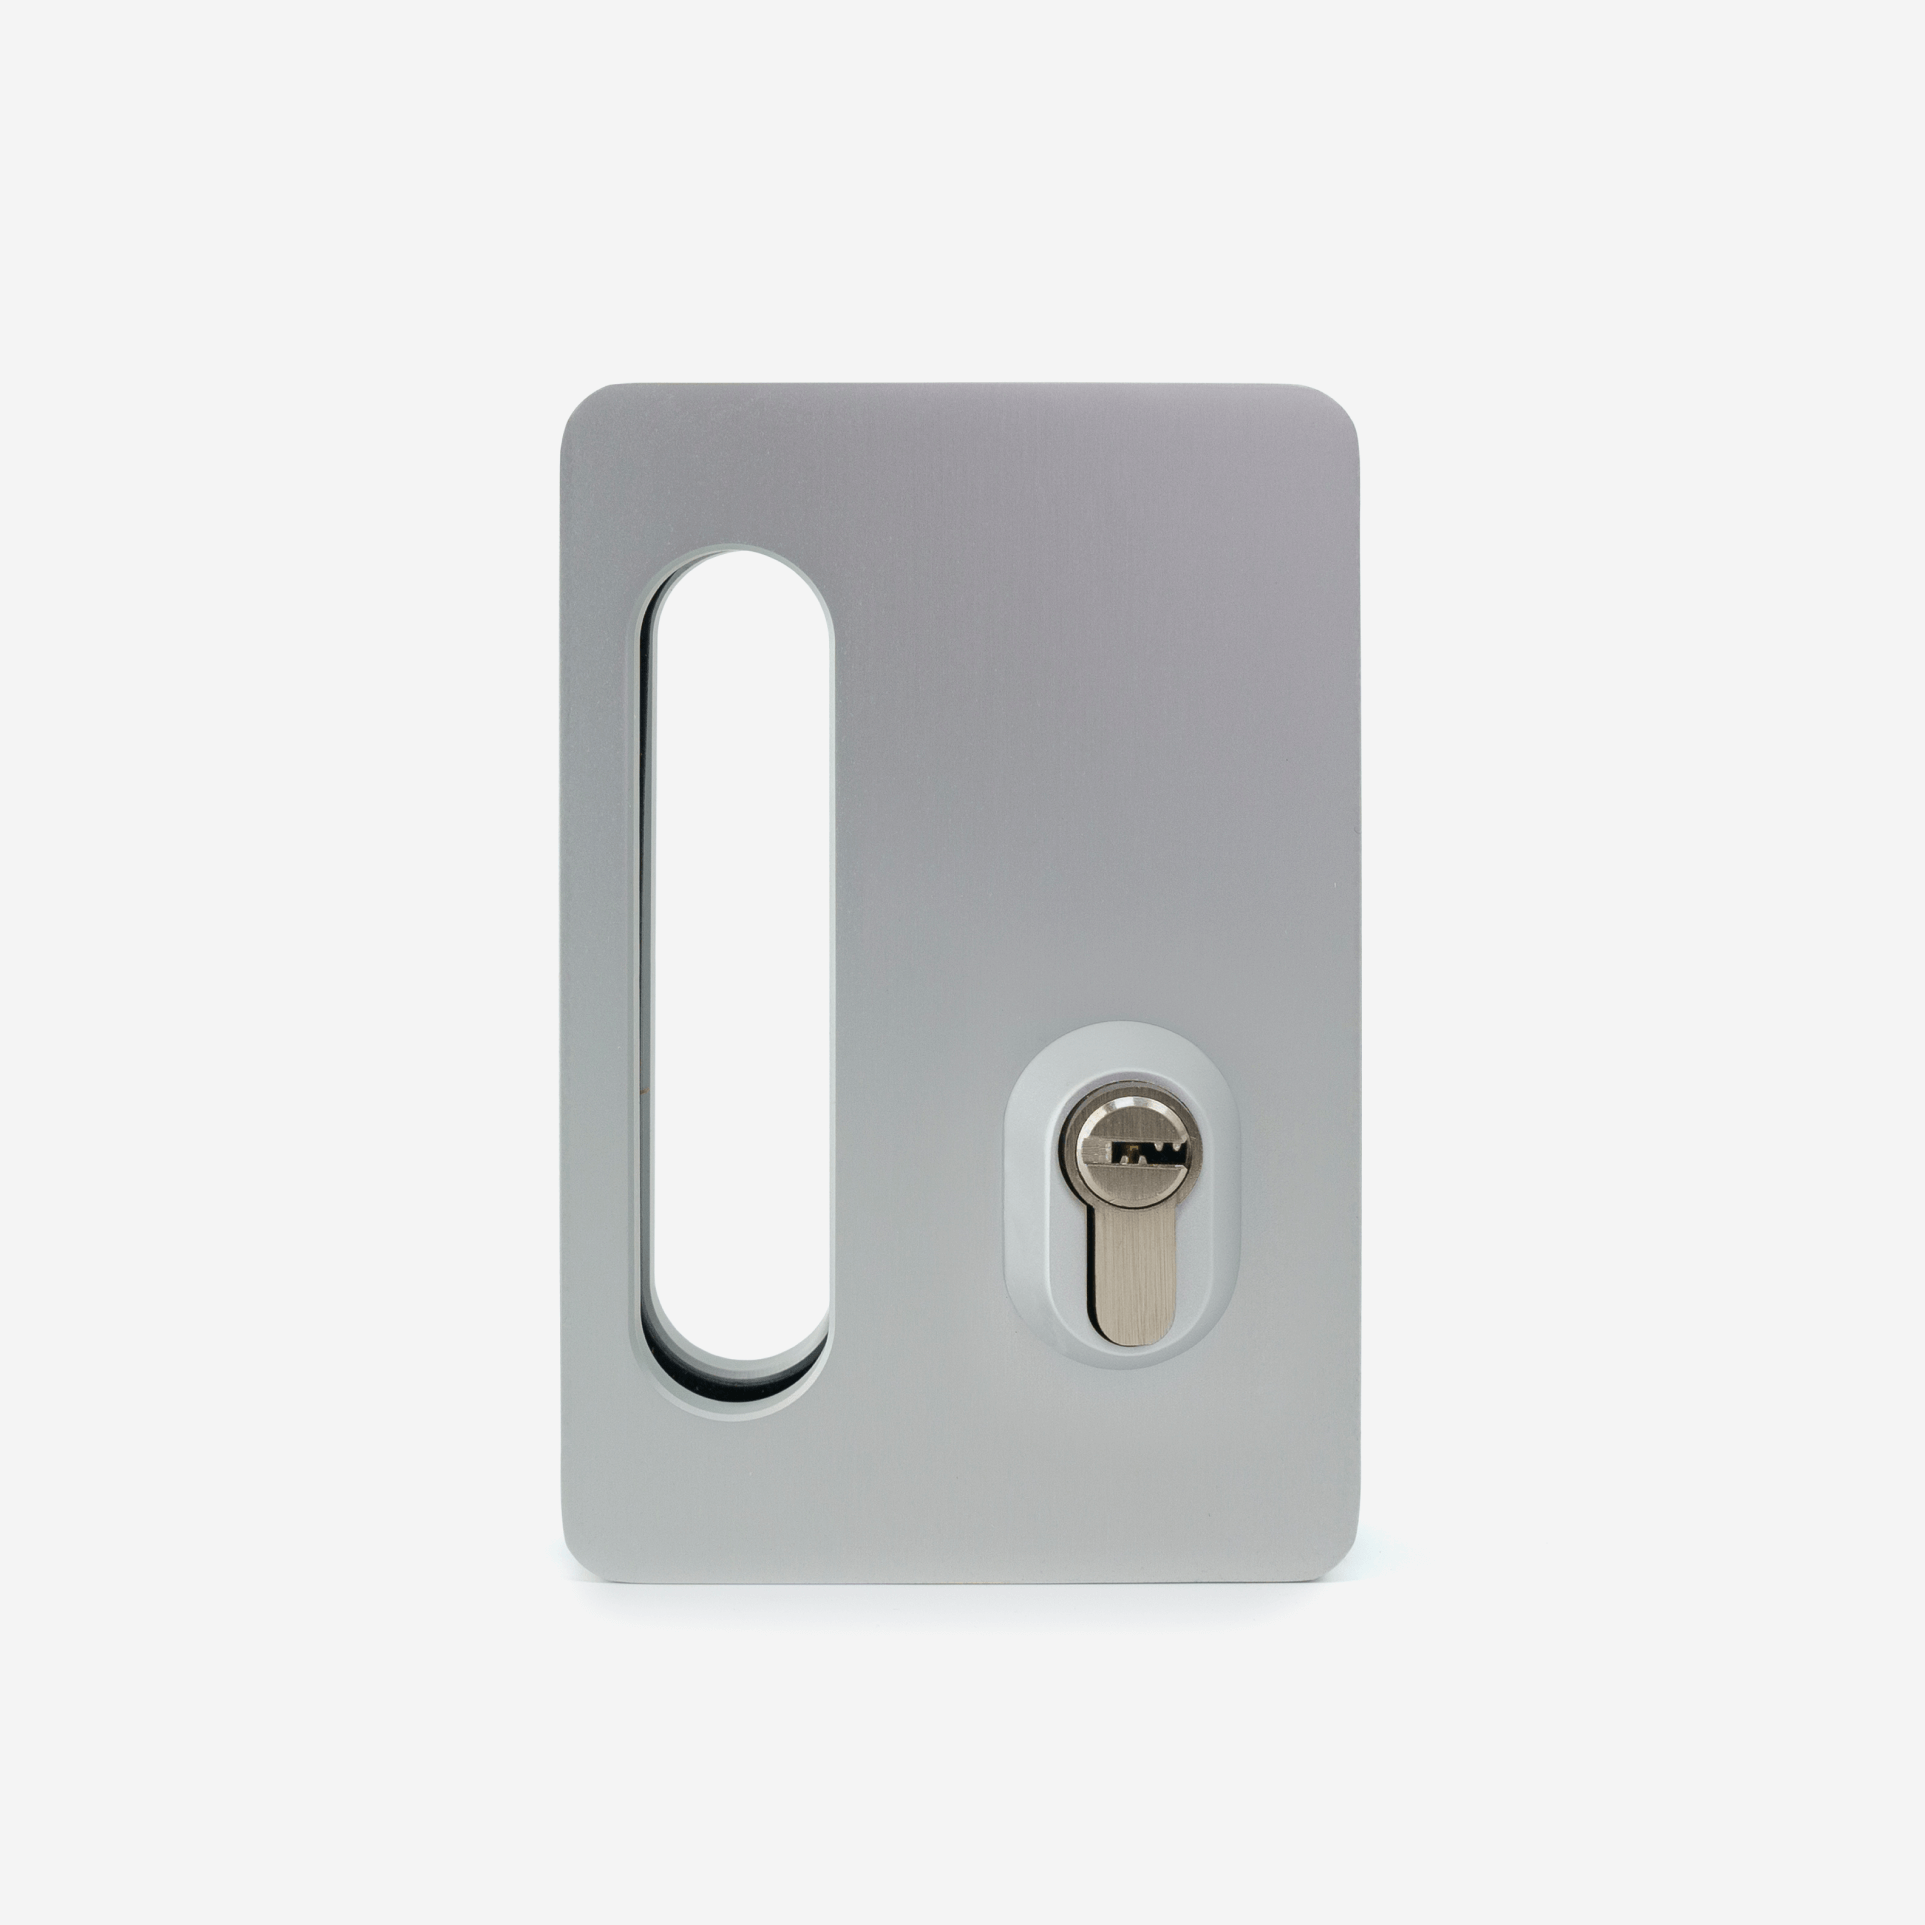 EUR Center Lock with Hook Bolt - Satin anodized